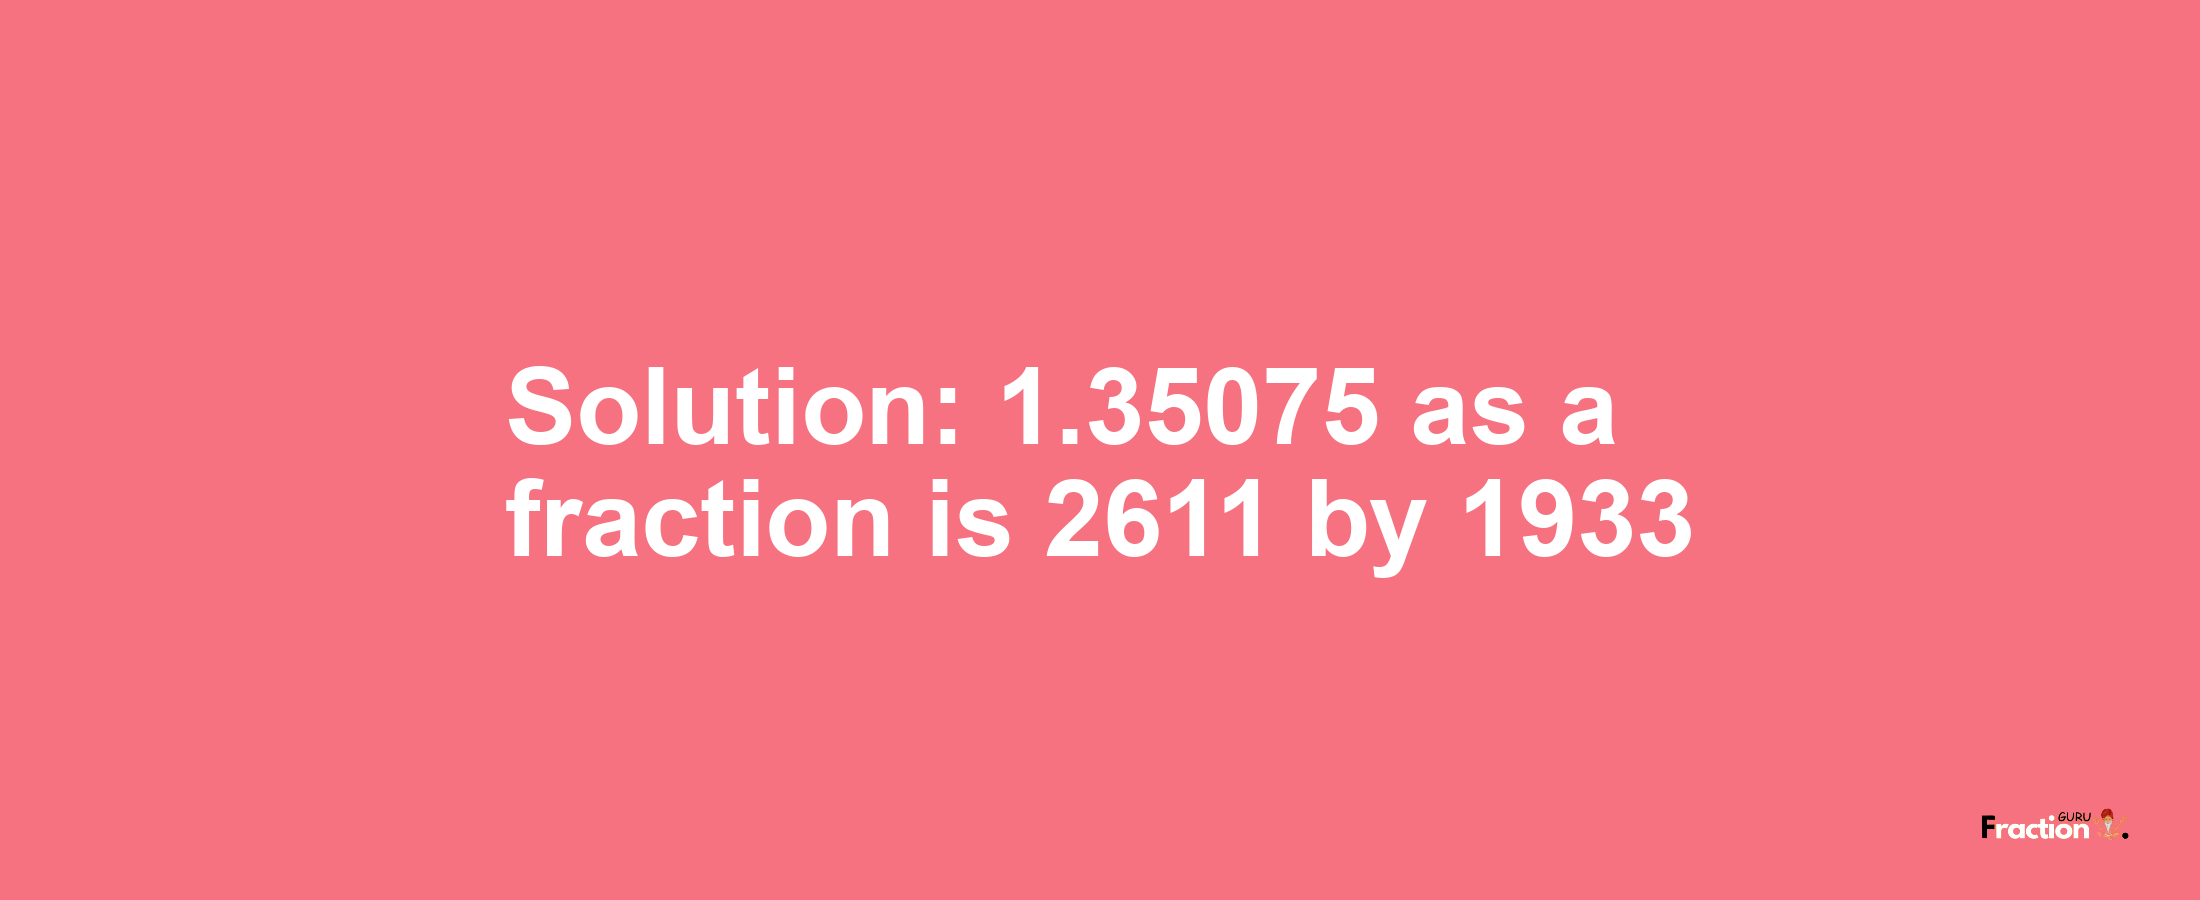 Solution:1.35075 as a fraction is 2611/1933